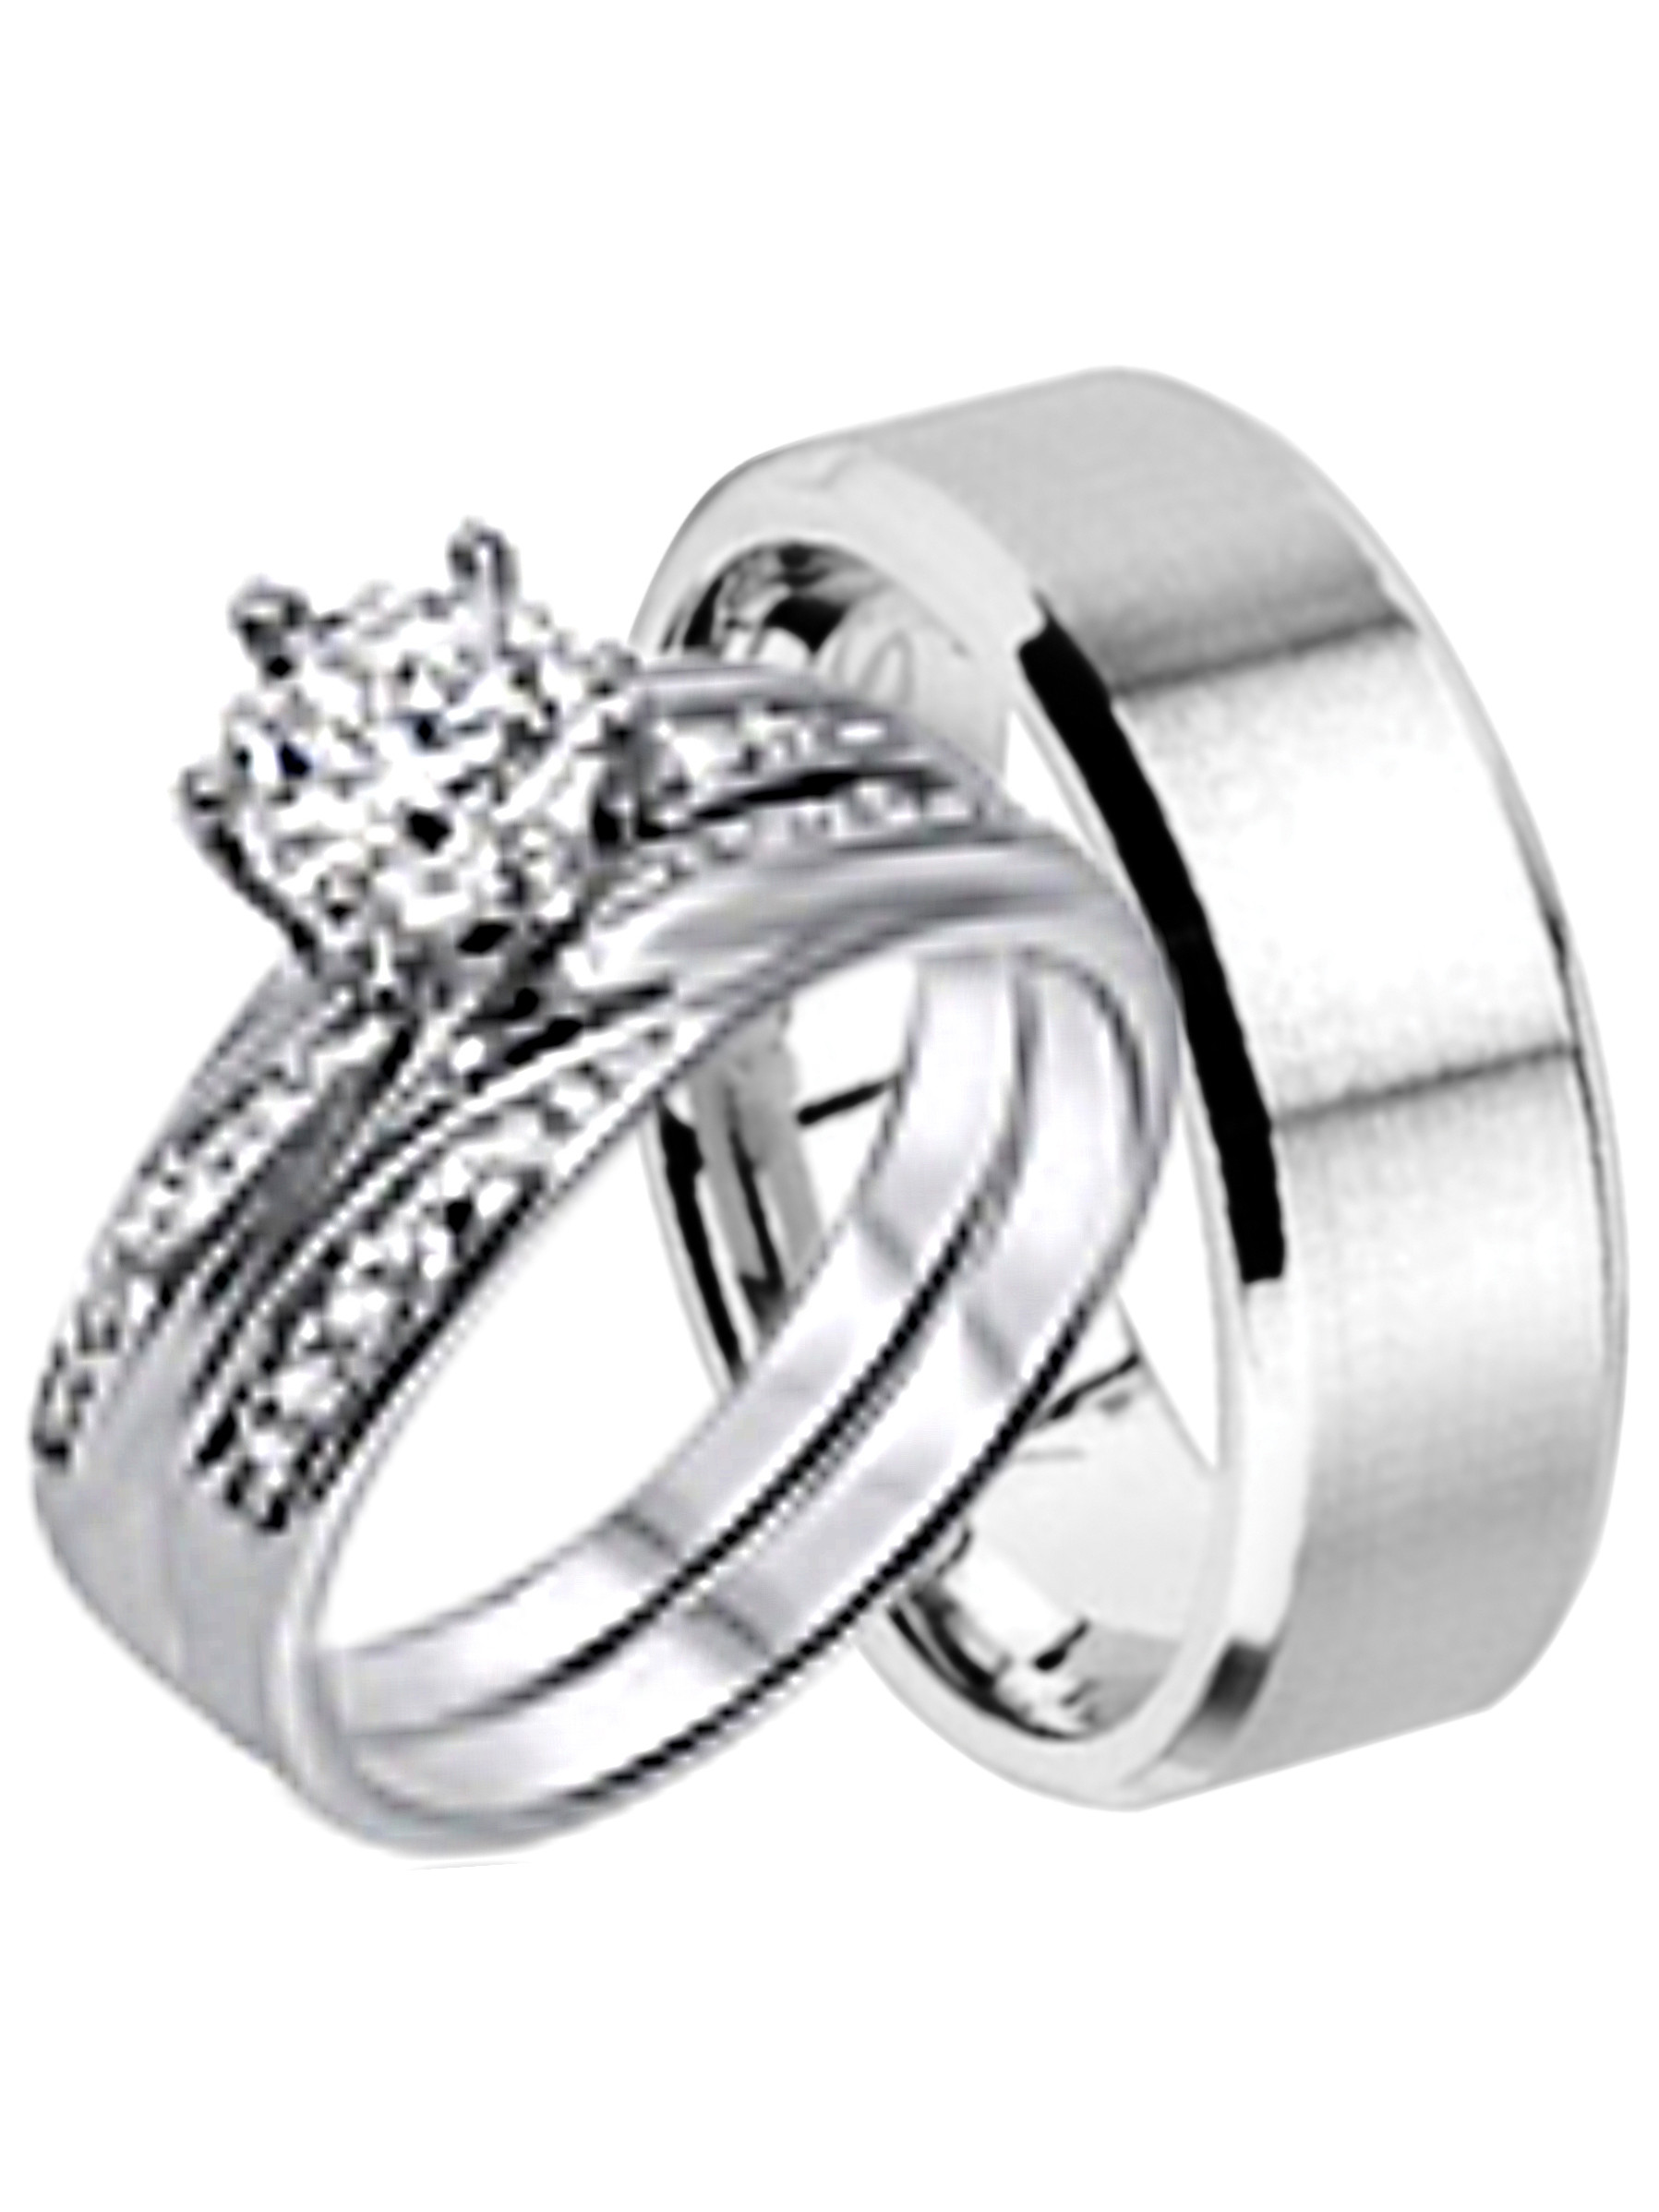 Wedding Ring Sets For Him And Her Walmart
 His and Hers Wedding Ring Set Matching Wedding Bands for